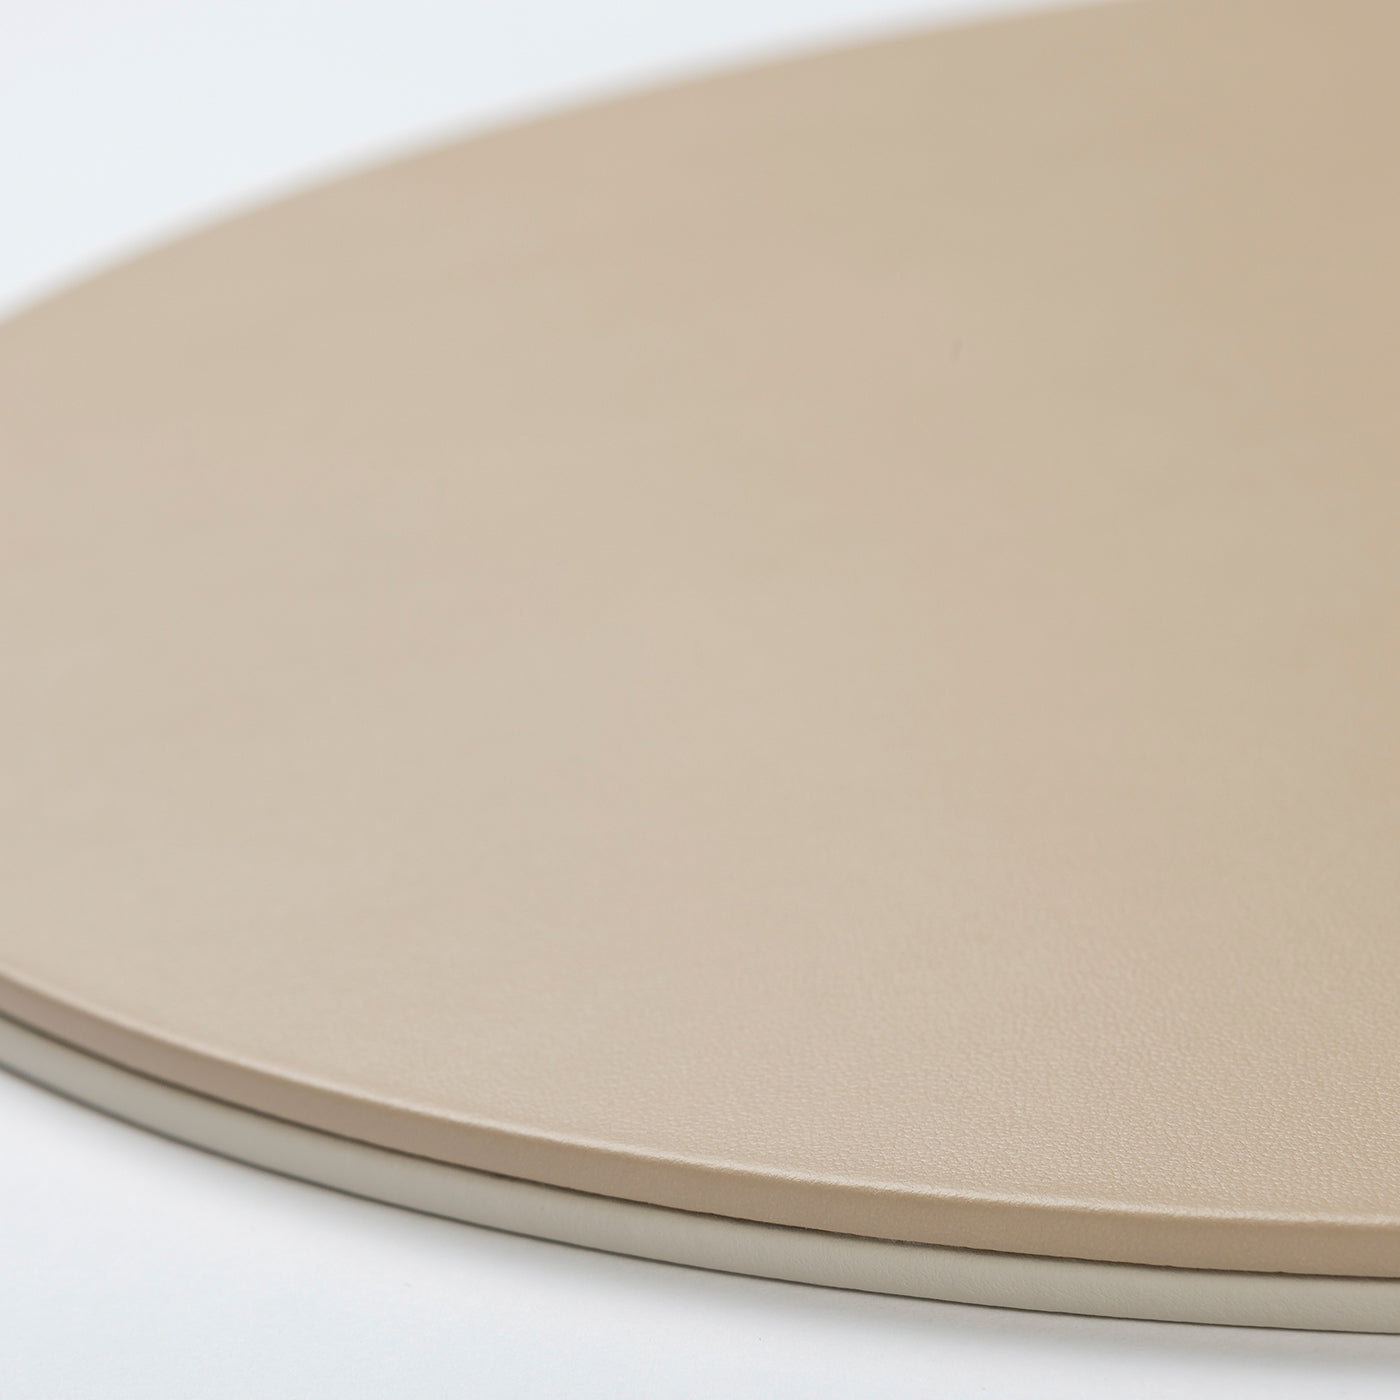 Mondrian Capuccino Beige and Luna White Oval Placemat - Alternative view 1